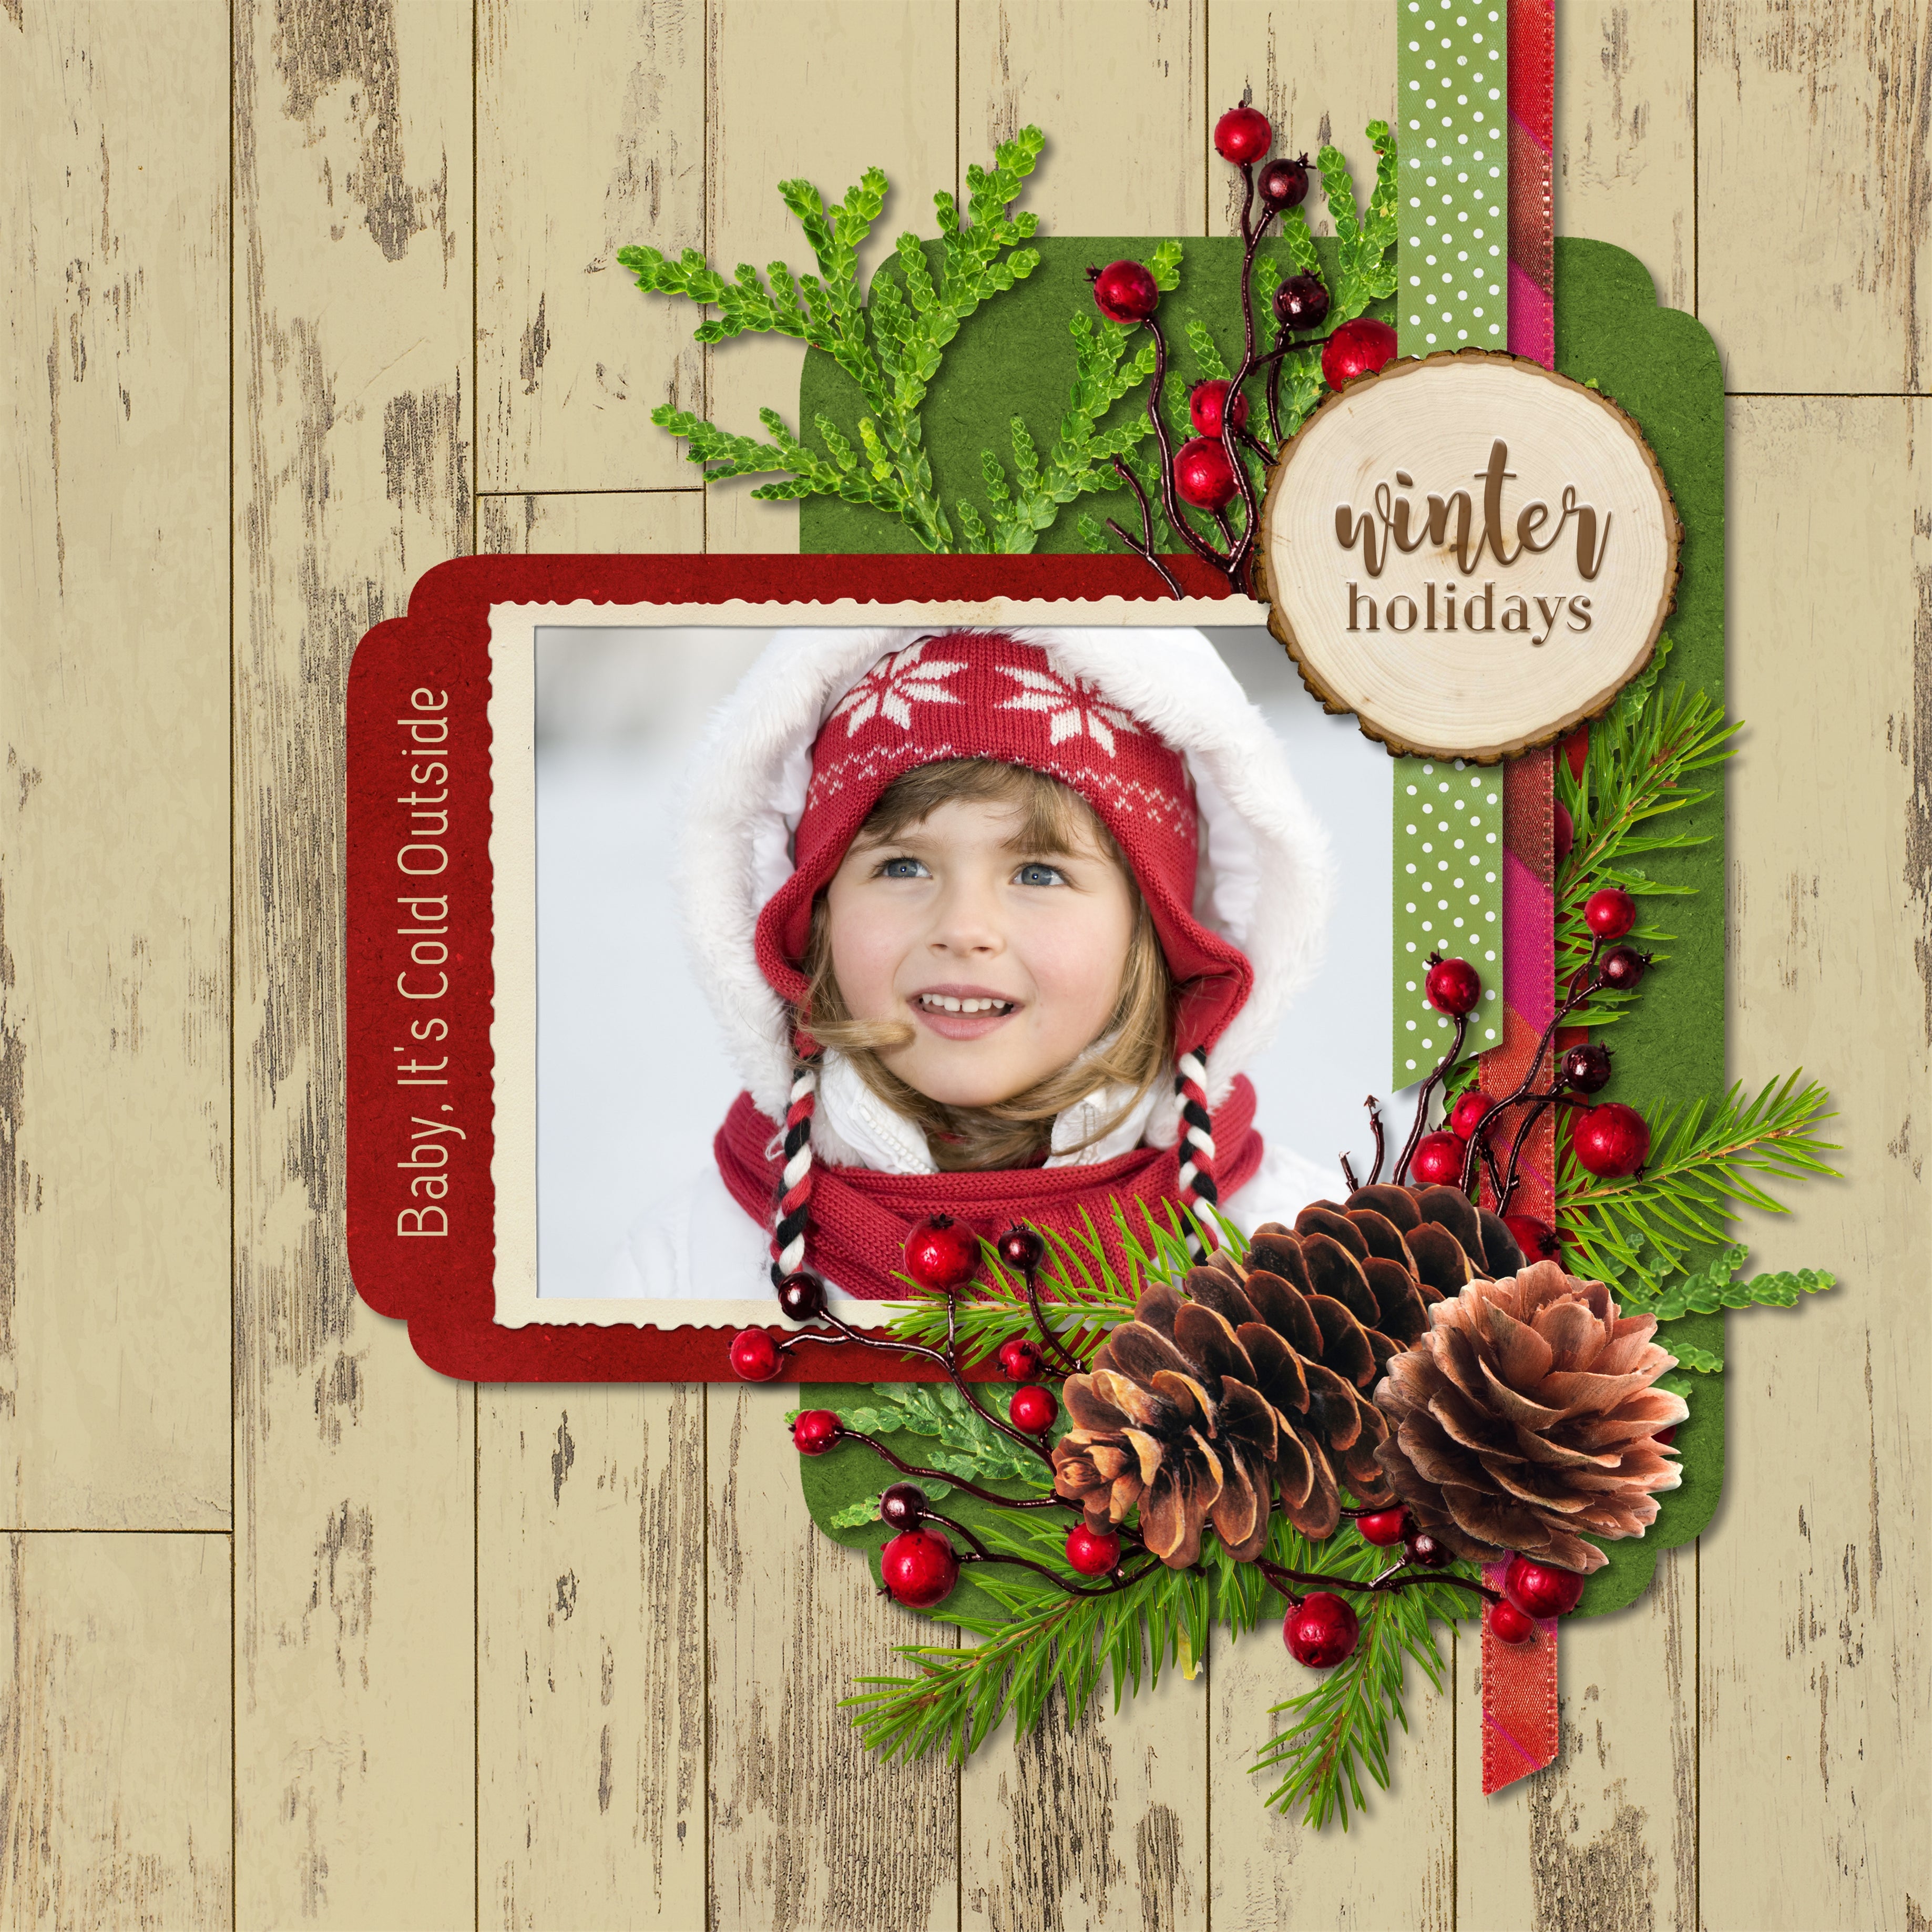 Winter is here and these seasonal digital art essentials will help you add those special touches to your digital scrapbook pages and albums all season long. Features woodland animals, evergreen pin, berries, pinecones, poinsettia, and more!